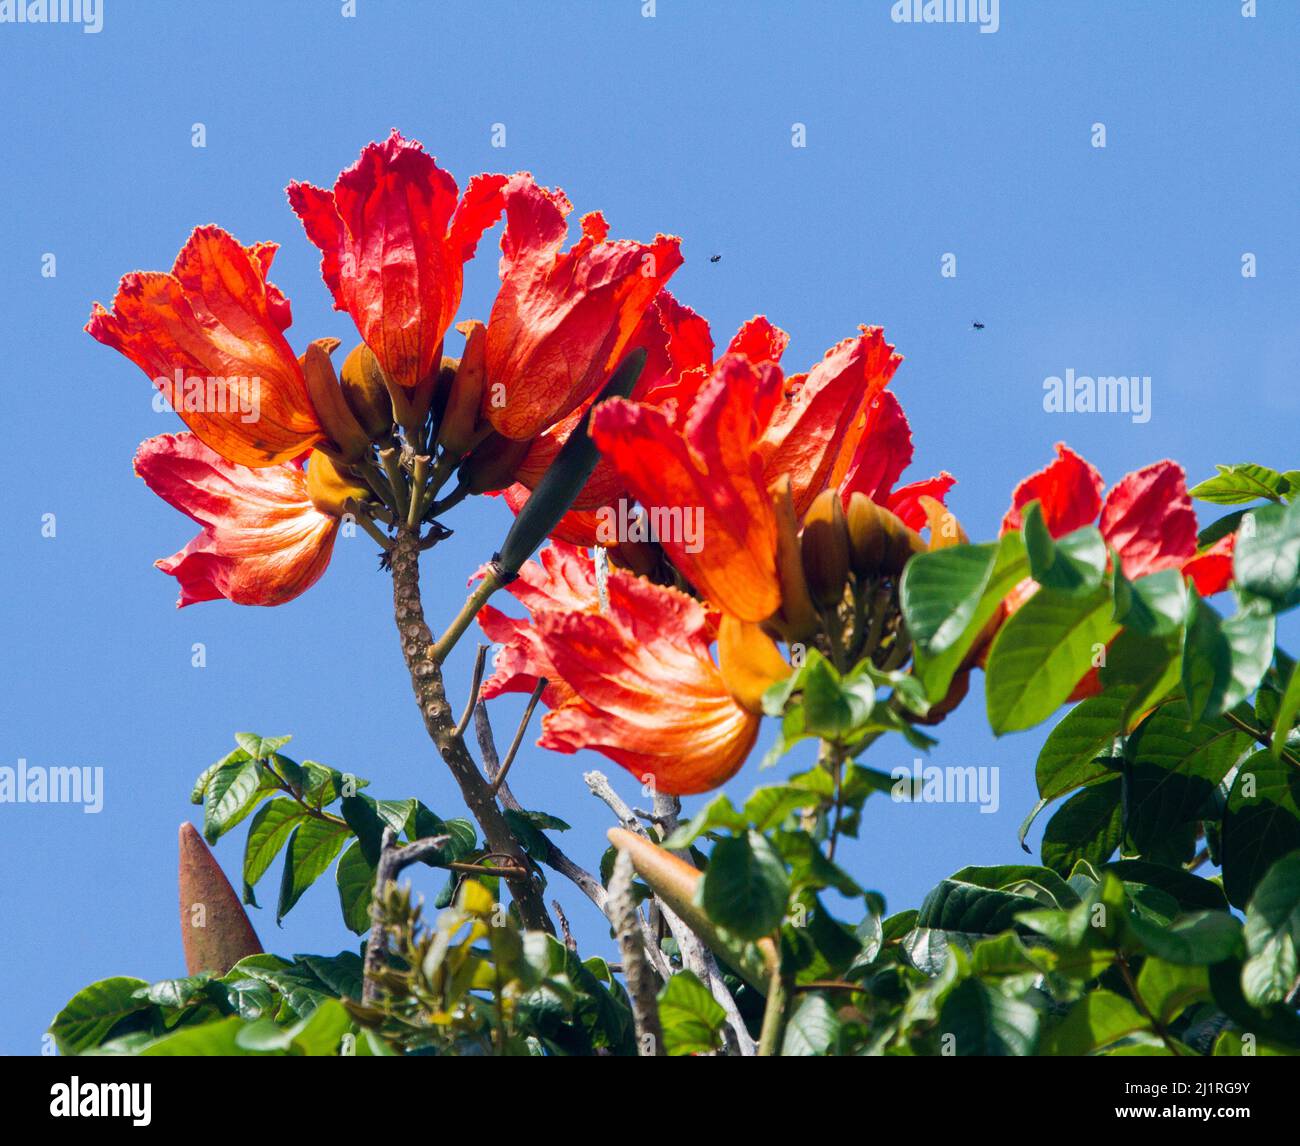 Cluster of large vivid orange / red flowers and leaves of Spathodea campanulata, African Tulip Tree against background of blue sky in Australia Stock Photo